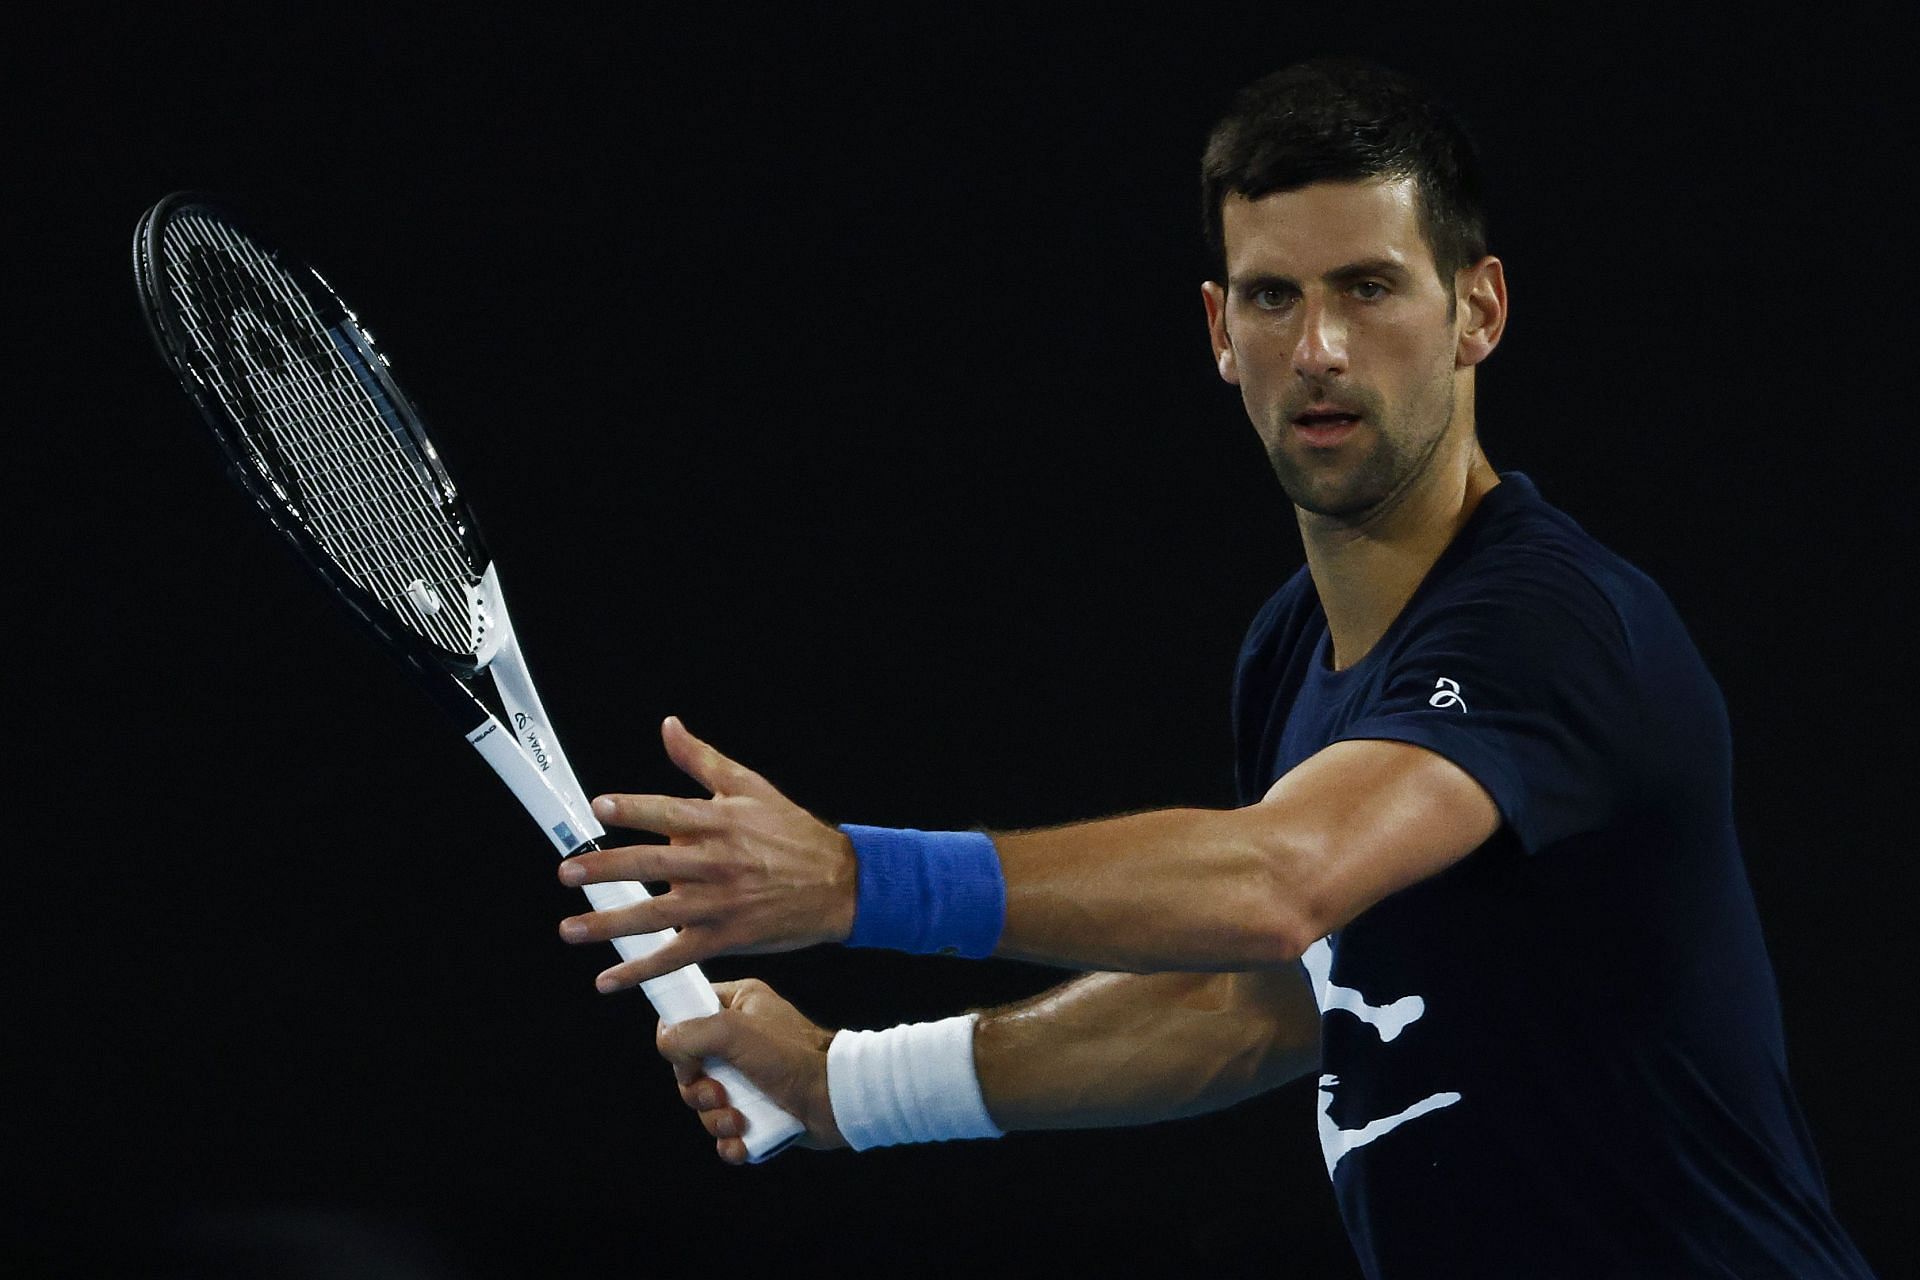 Novak Djokovic during a practice session at the 2022 Australian Open